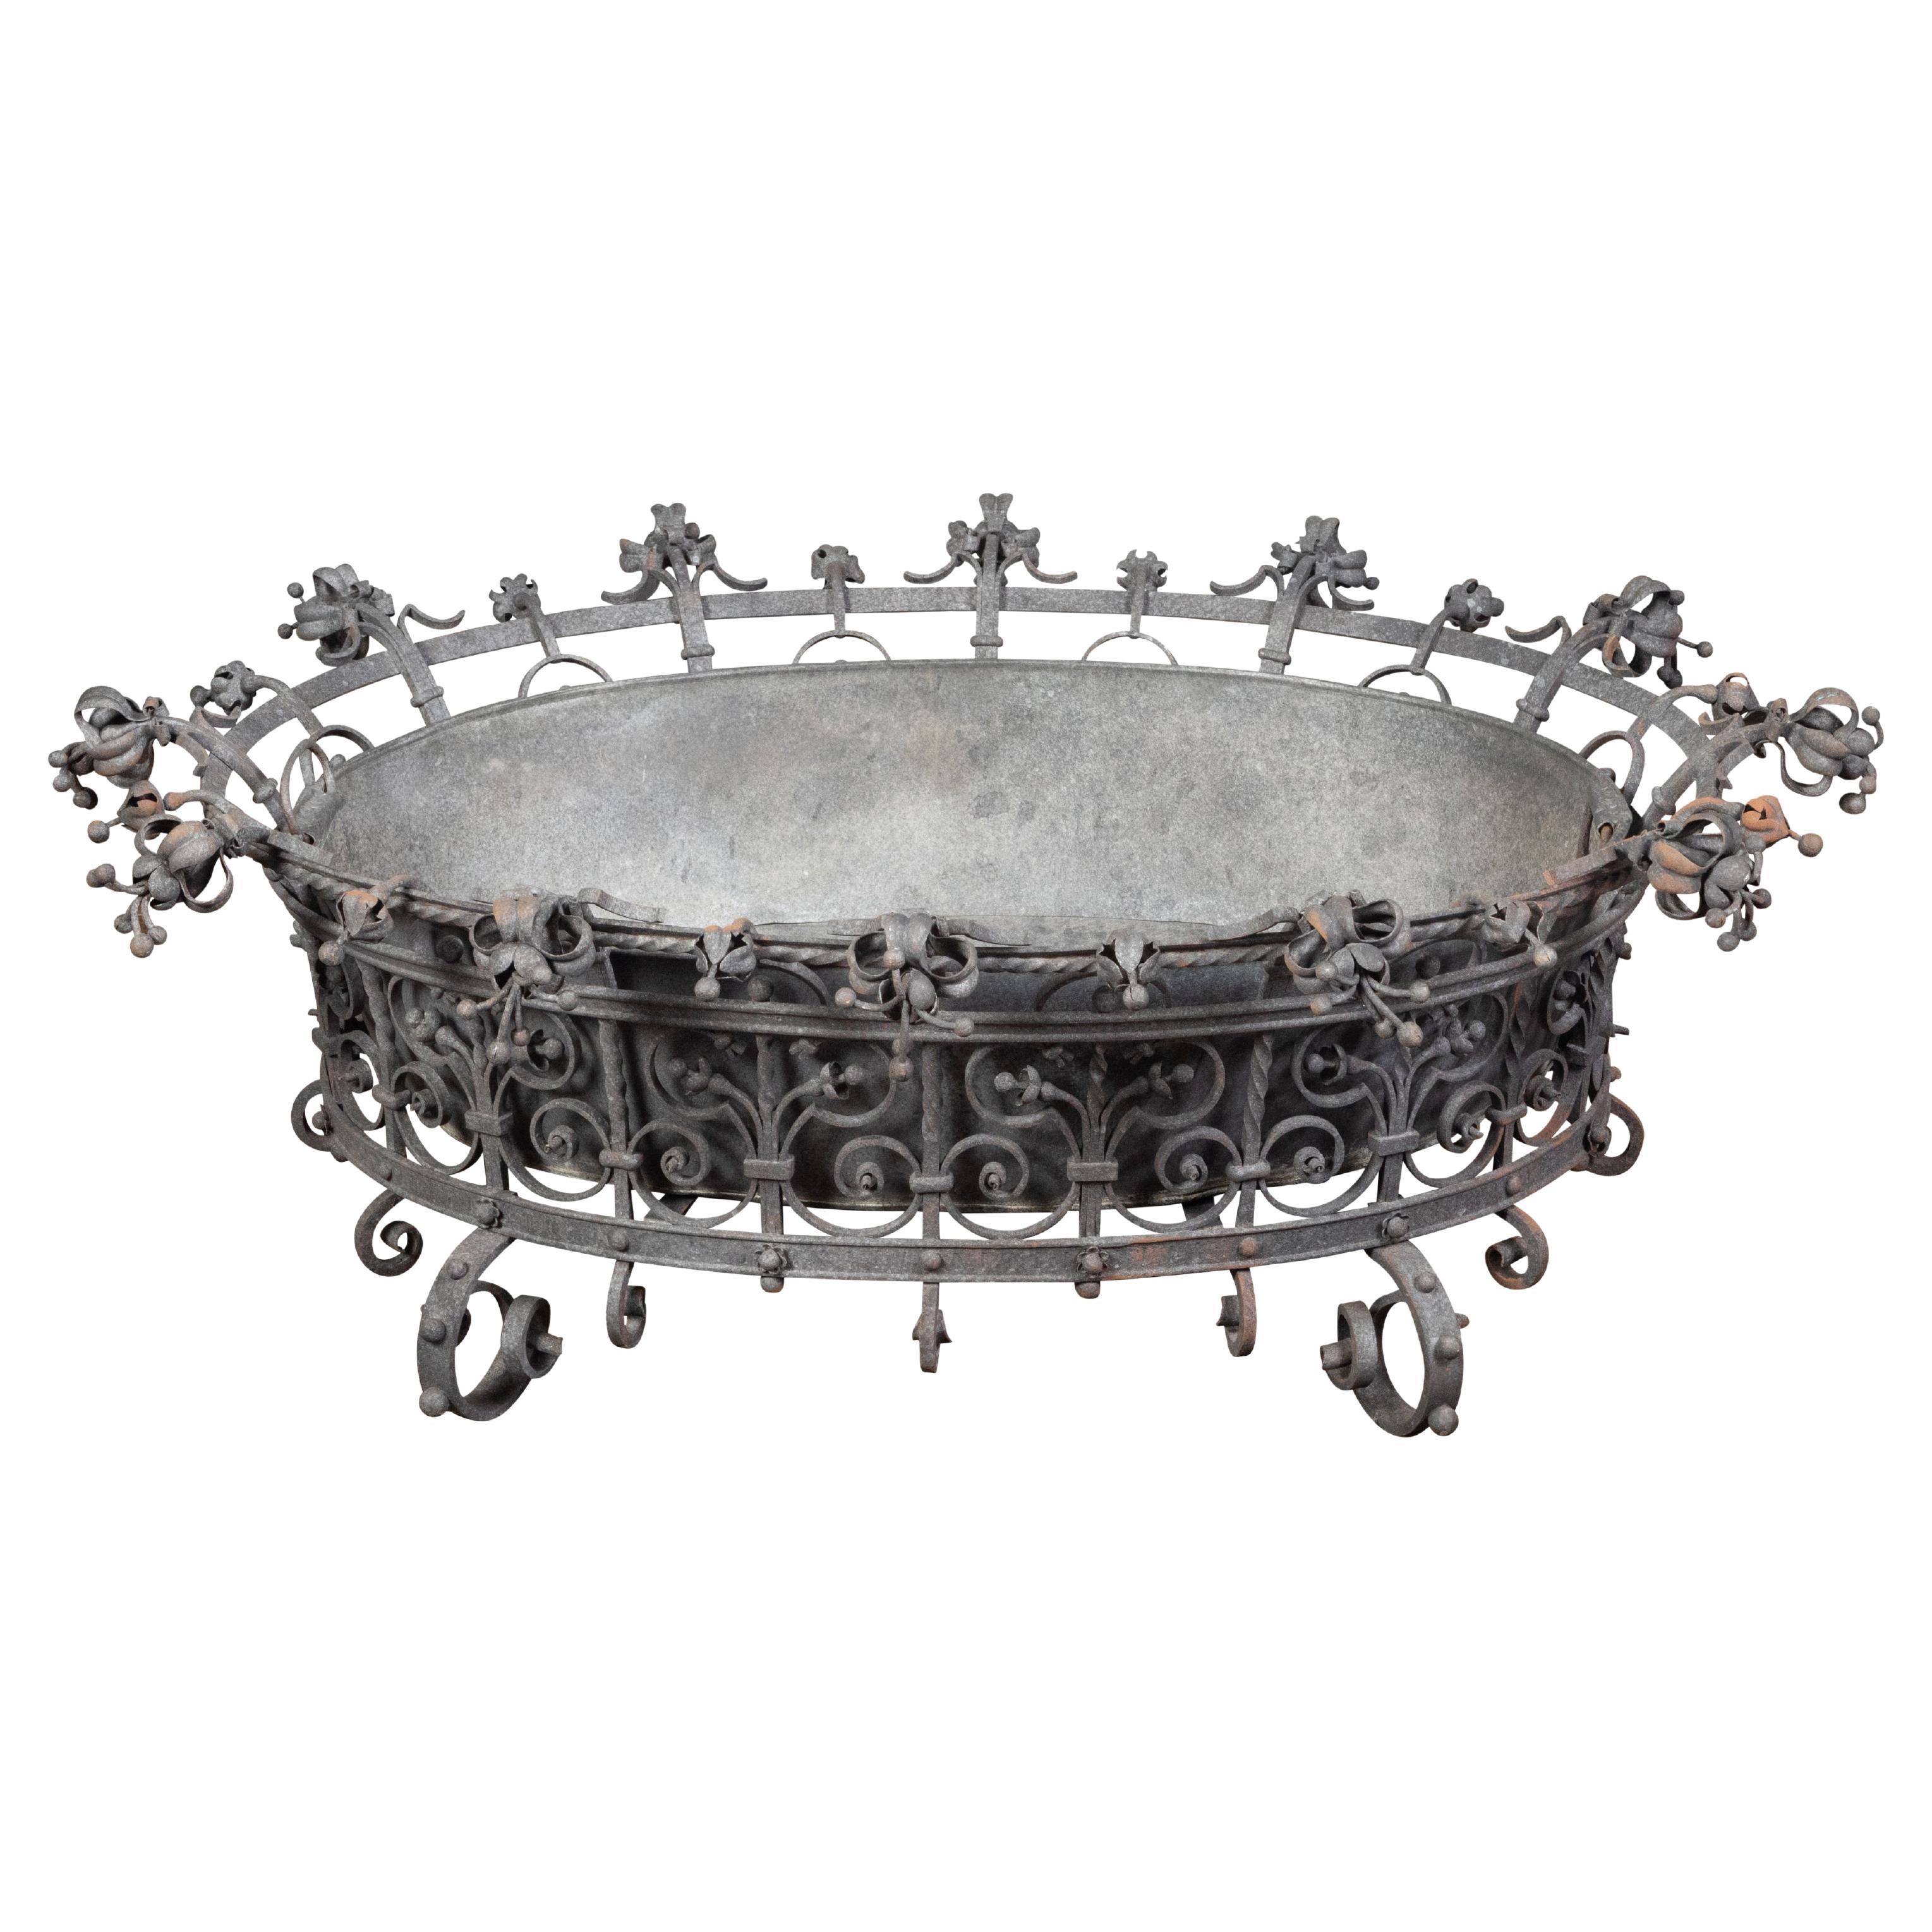 Oversized French 1900s Iron Planter with Scrollwork Motifs and Liner